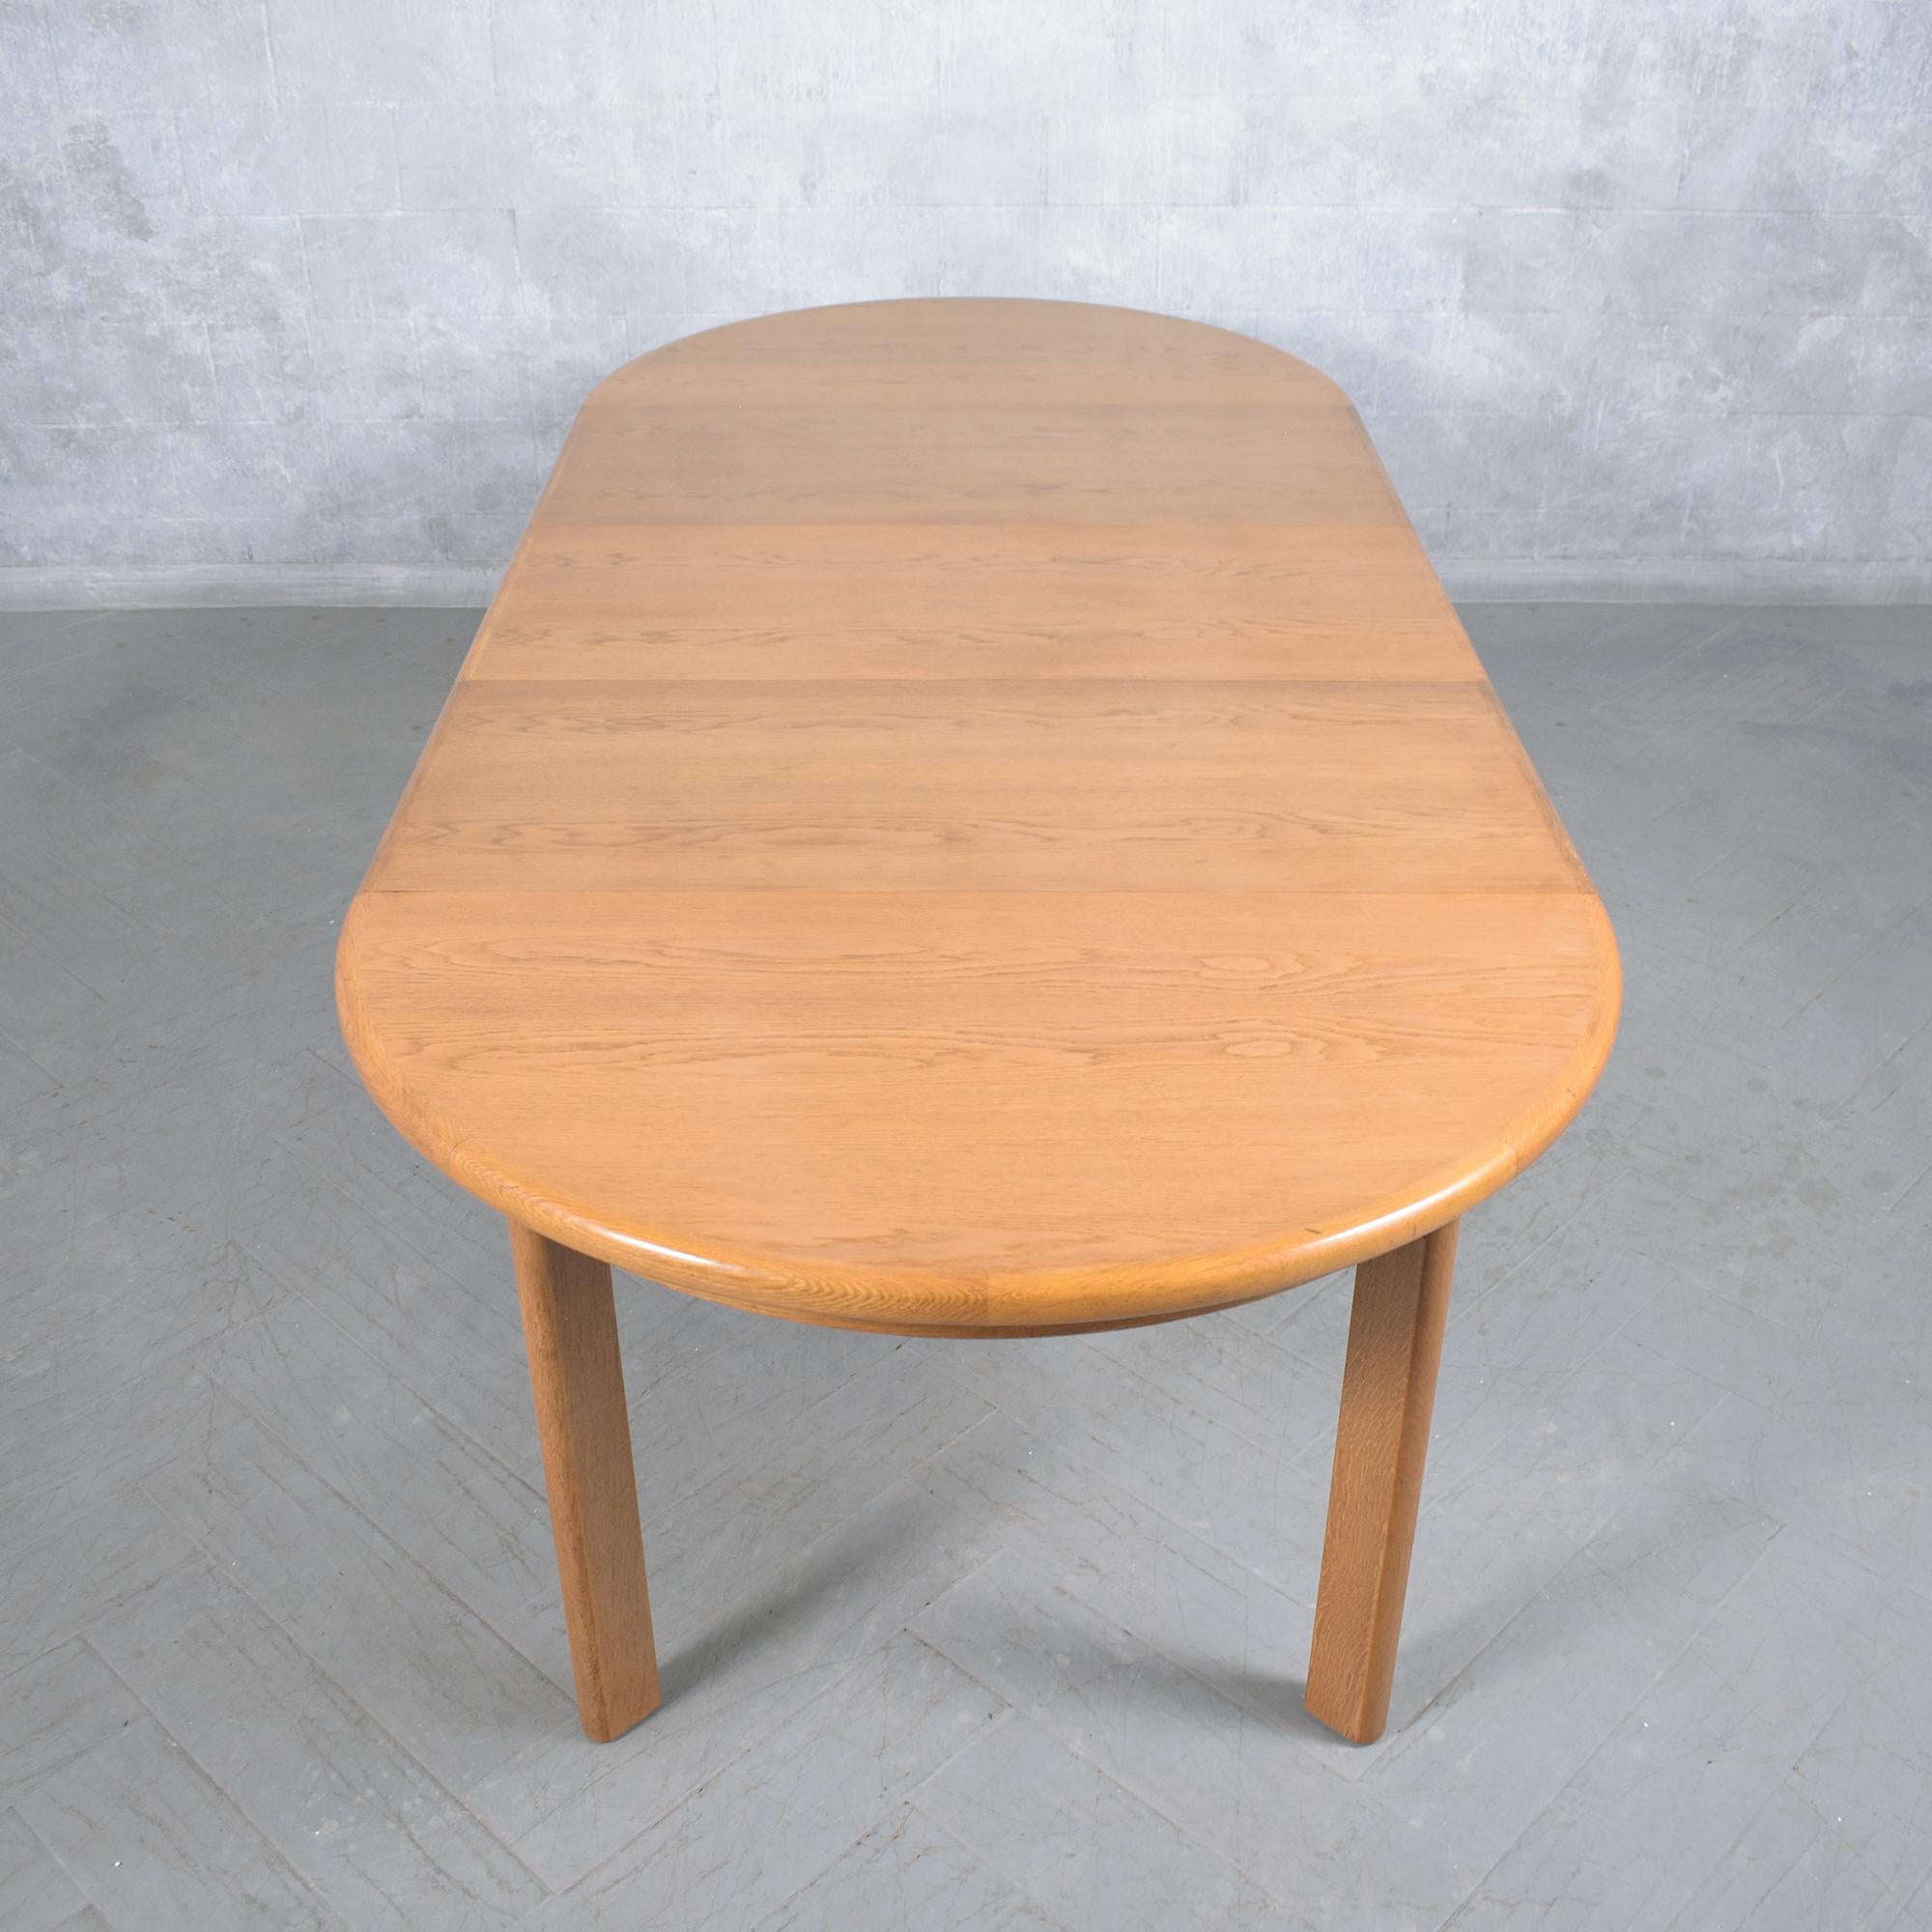 1970s Danish Modern Teak Dining Table with Extendable Leaves For Sale 7